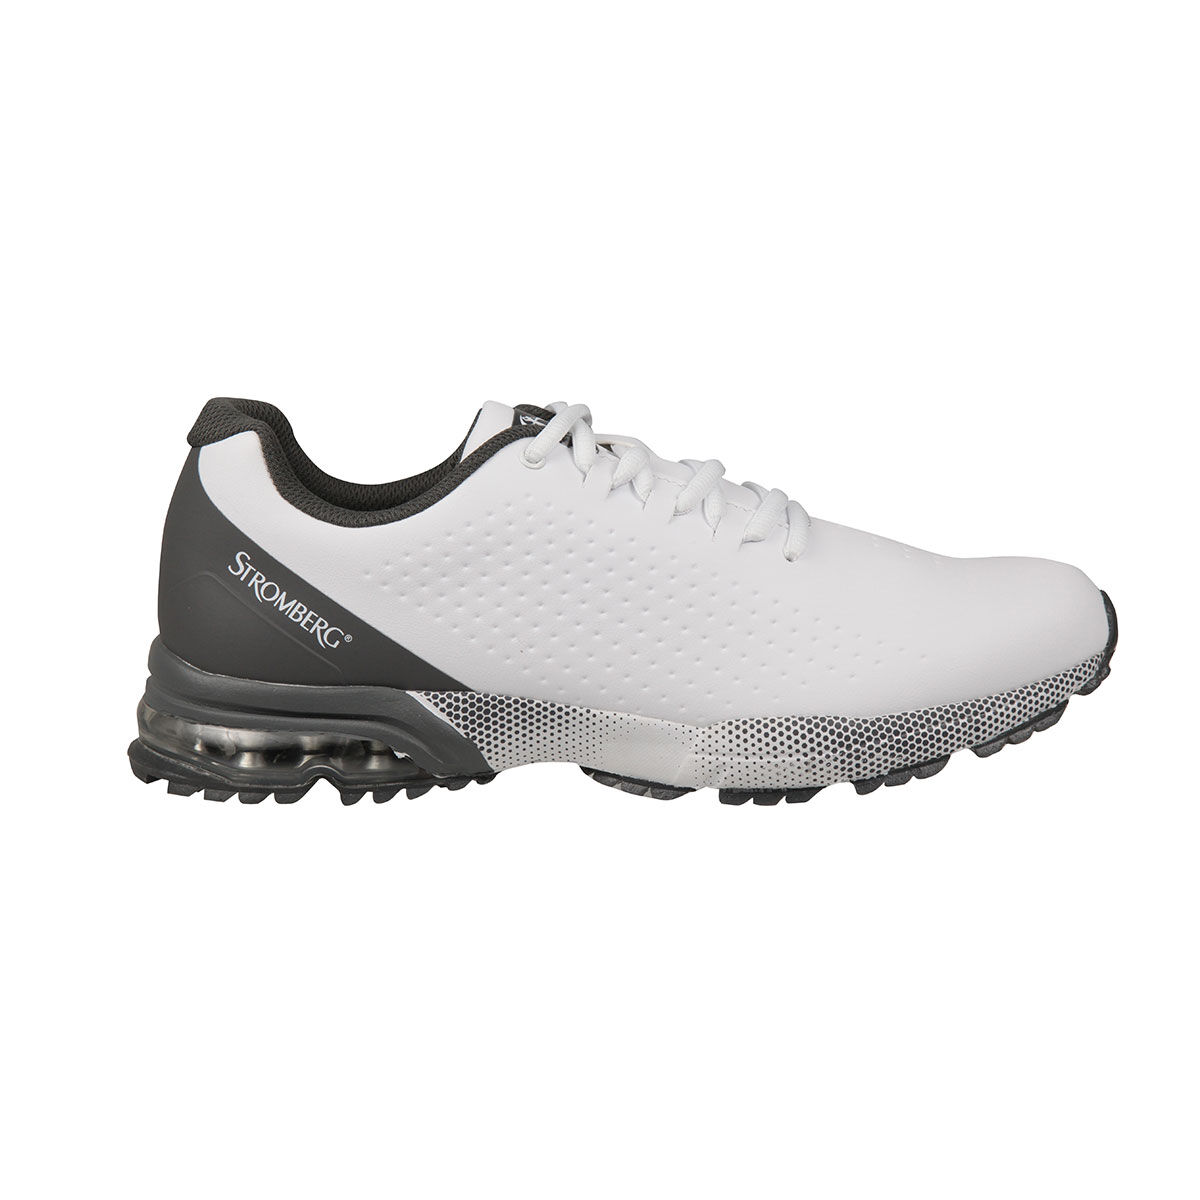 Stromberg Golf Shoes, Men's Ailsa Waterproof Spikeless, Mens, White/grey, 9 | American Golf - Father's Day Gift von Stromberg